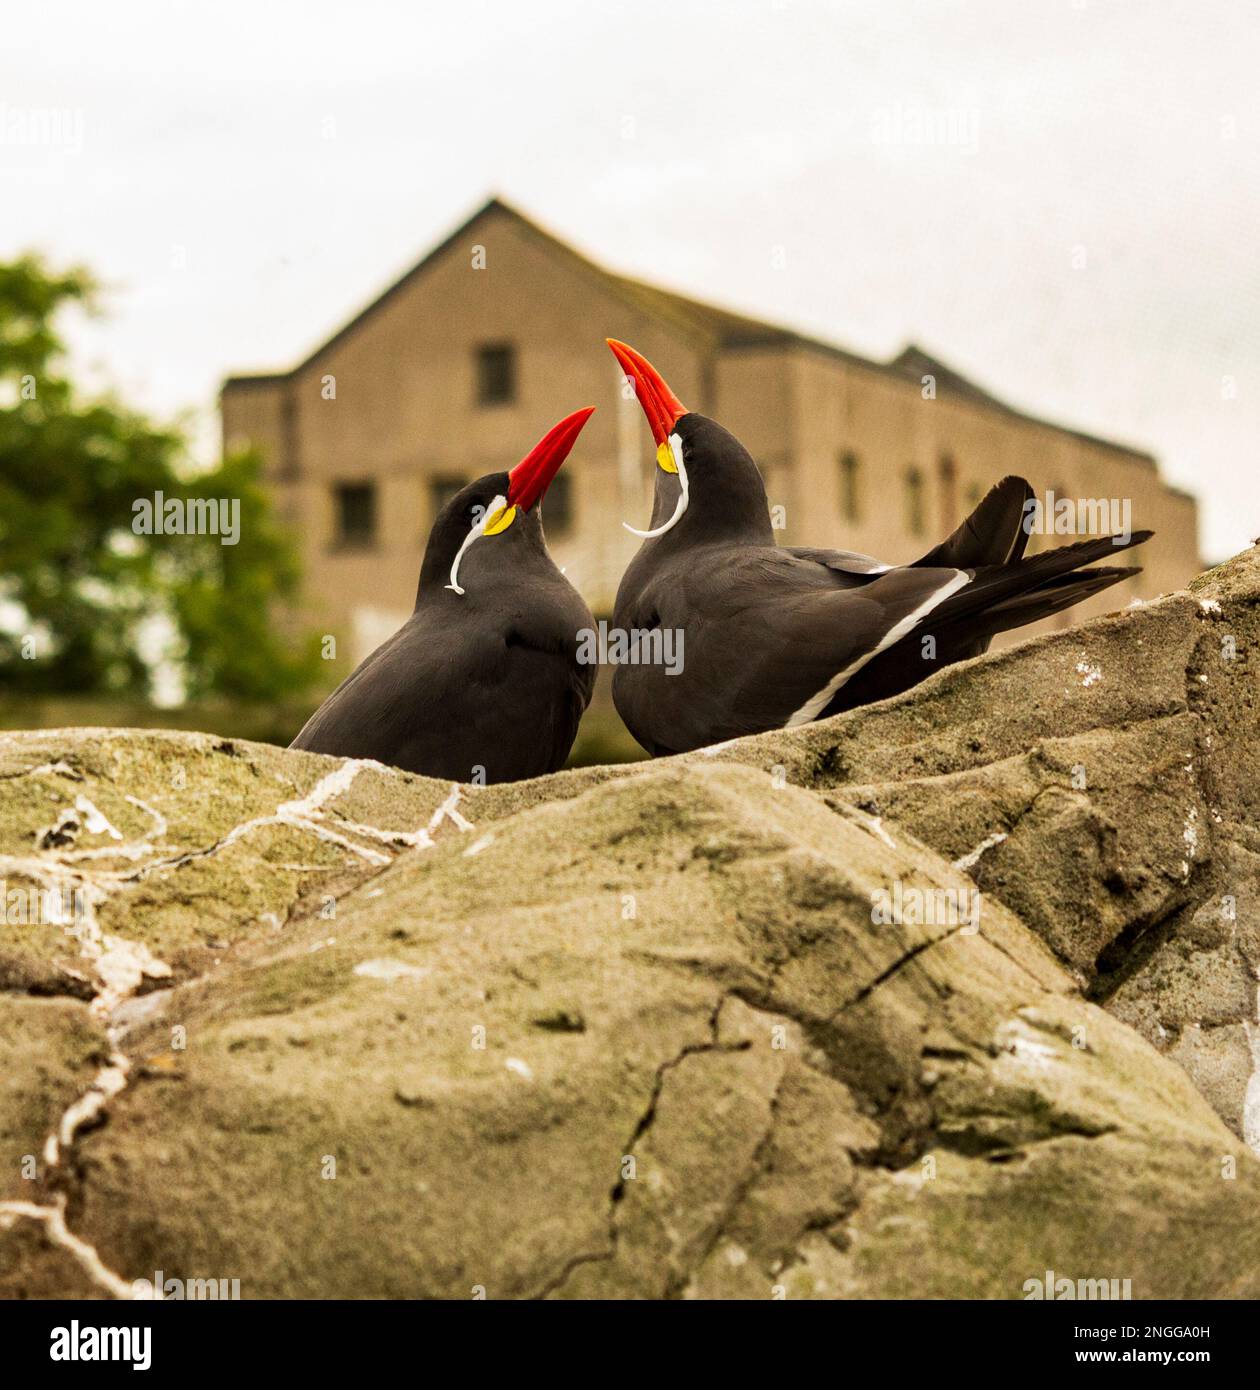 Two Inca Terns sitting on rocks with their heads pointing upwards Stock Photo